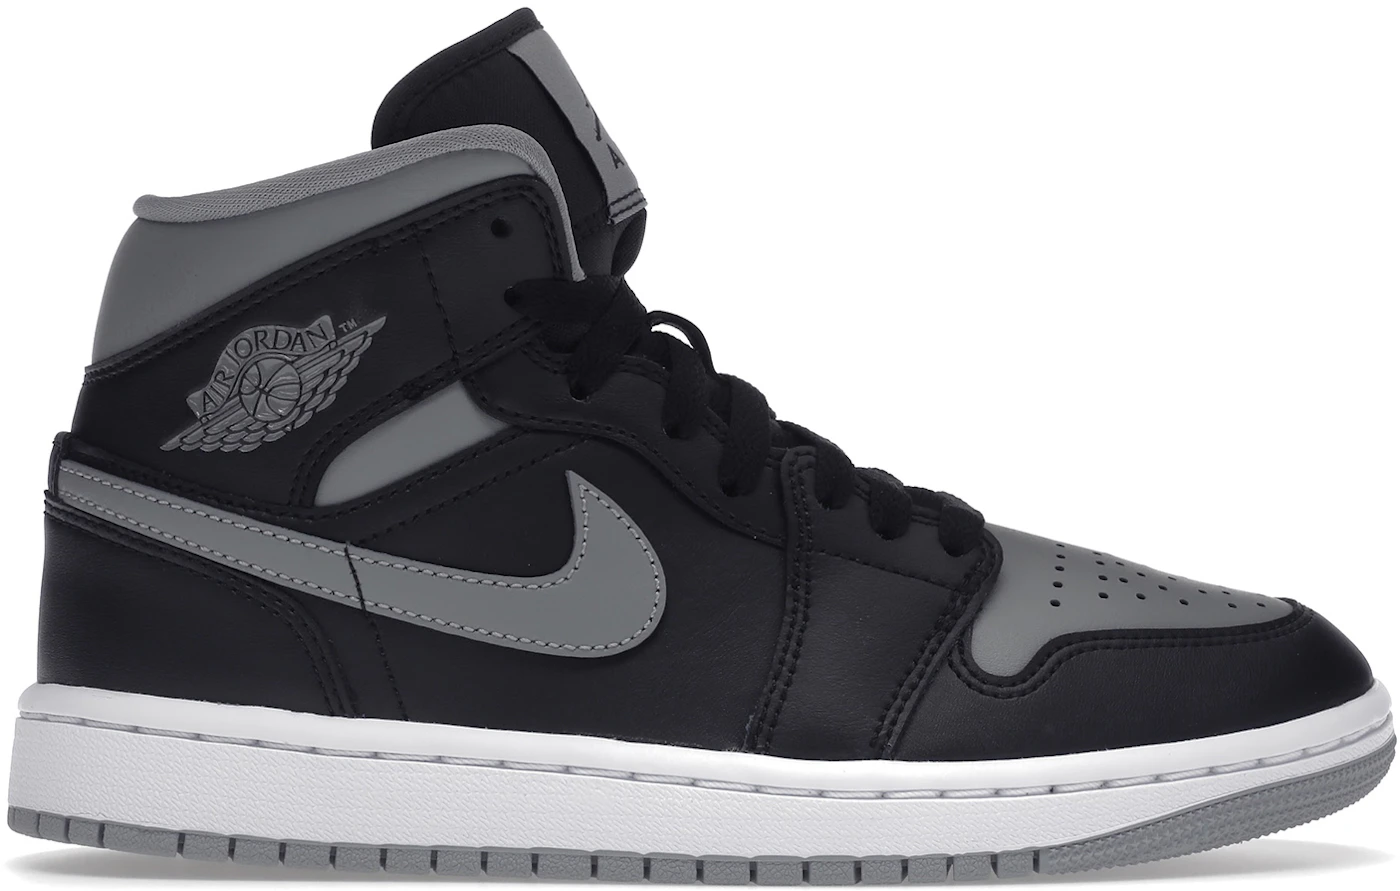 Jordan 1 Mid Shadow for Sale, Authenticity Guaranteed